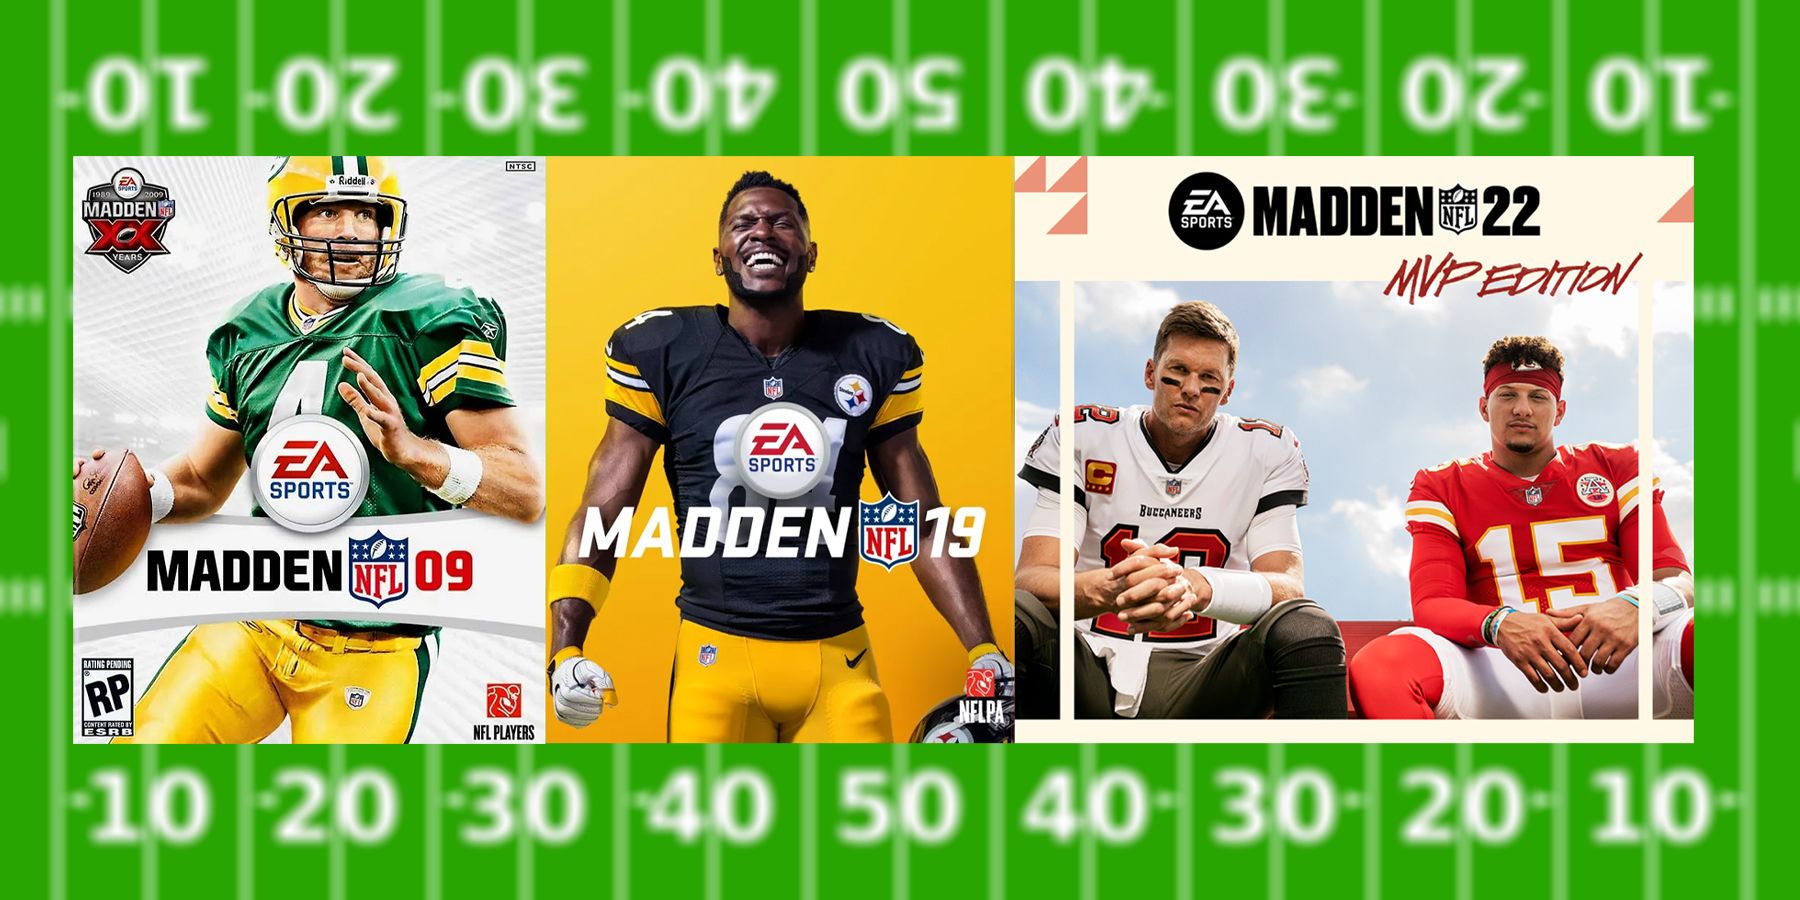 The covers for Madden NFL 09, Madden NFL 19, and Madden NFL 22 featuring in order Brett Favre, Antonio Brown, Tom Brady, and Patrick Mahomes.